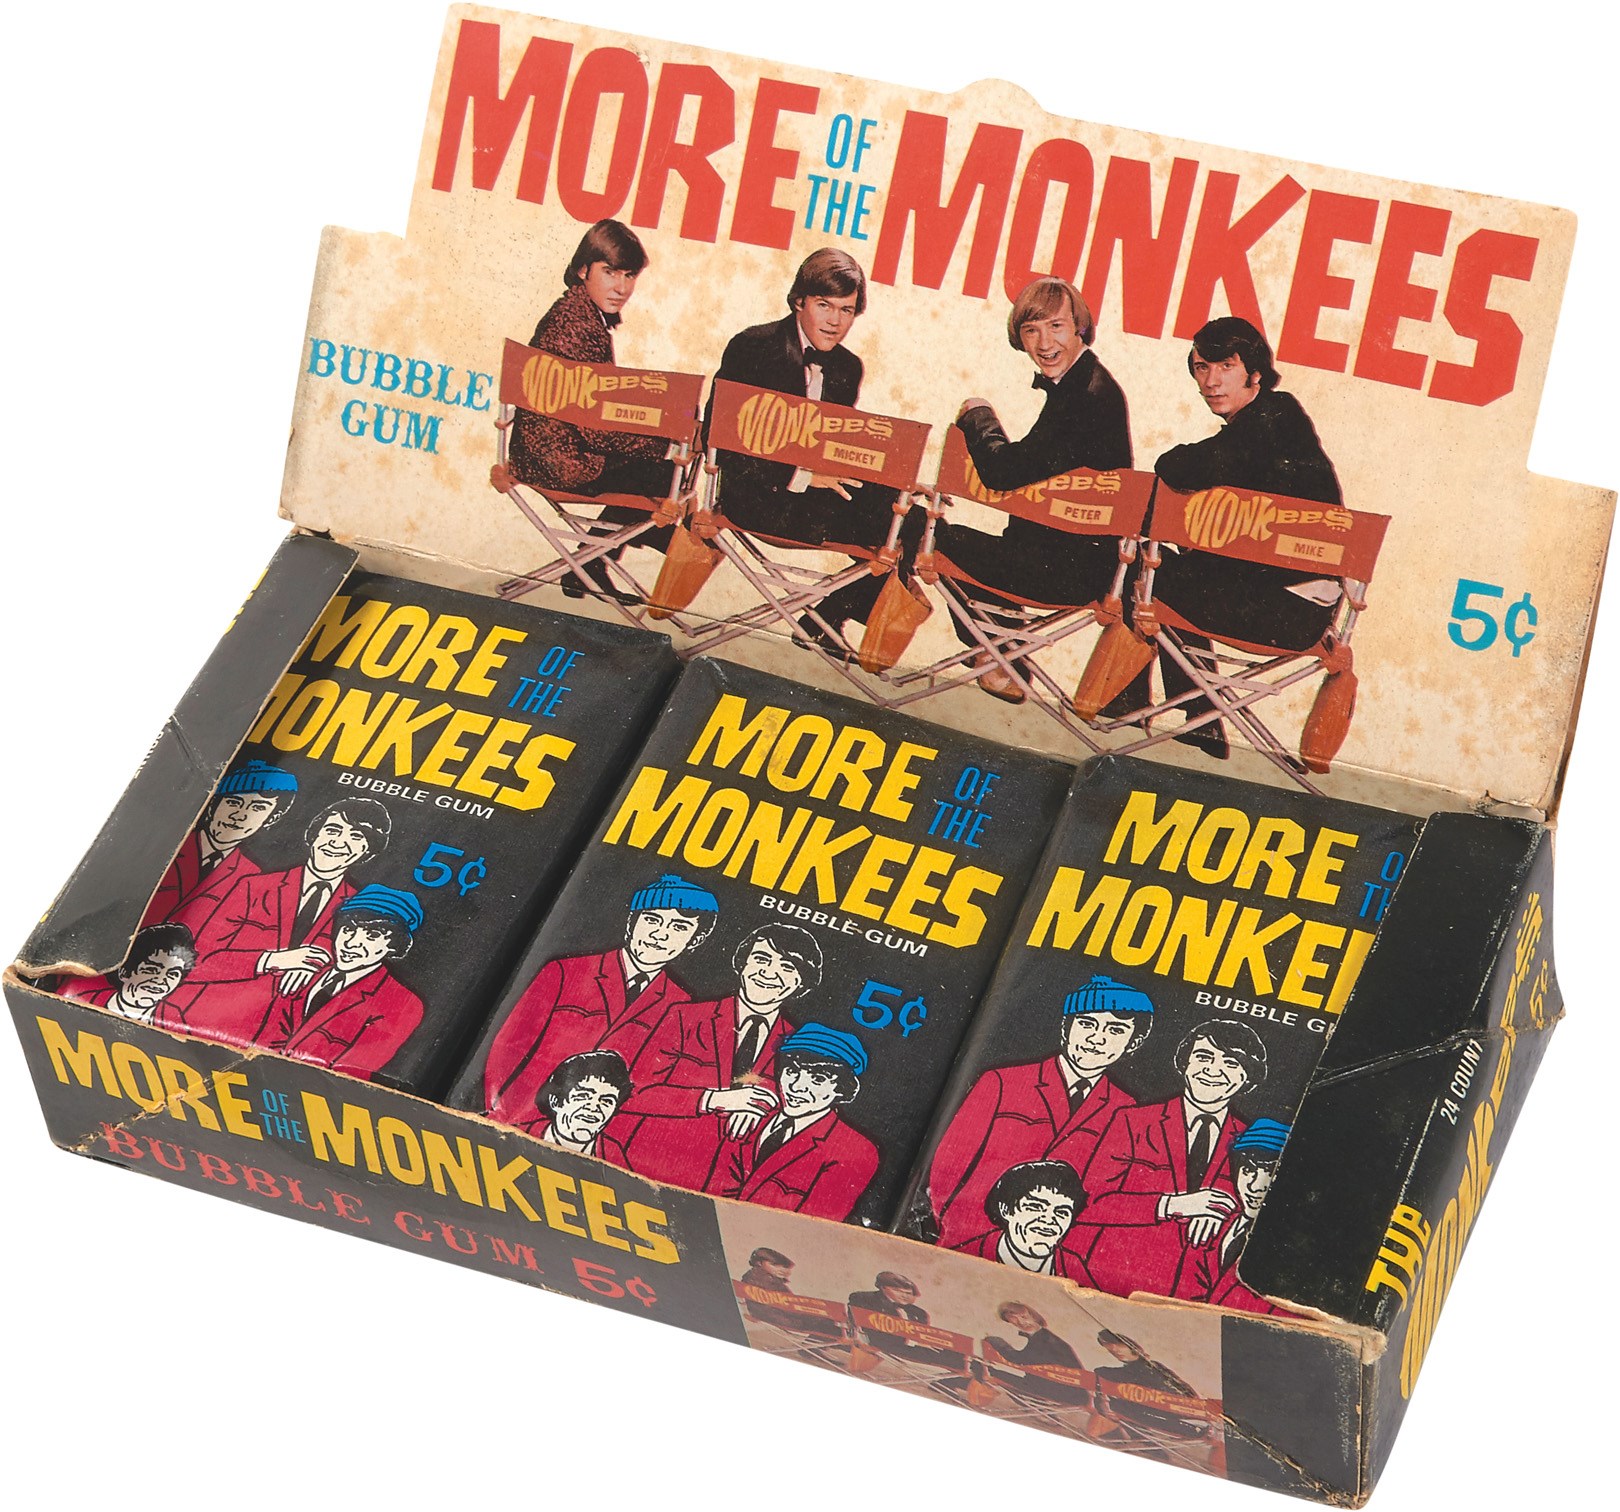 Baseball and Trading Cards - 1967 Donruss More of the Monkees Wax Box (24 Packs) - BBCE Wrapped.